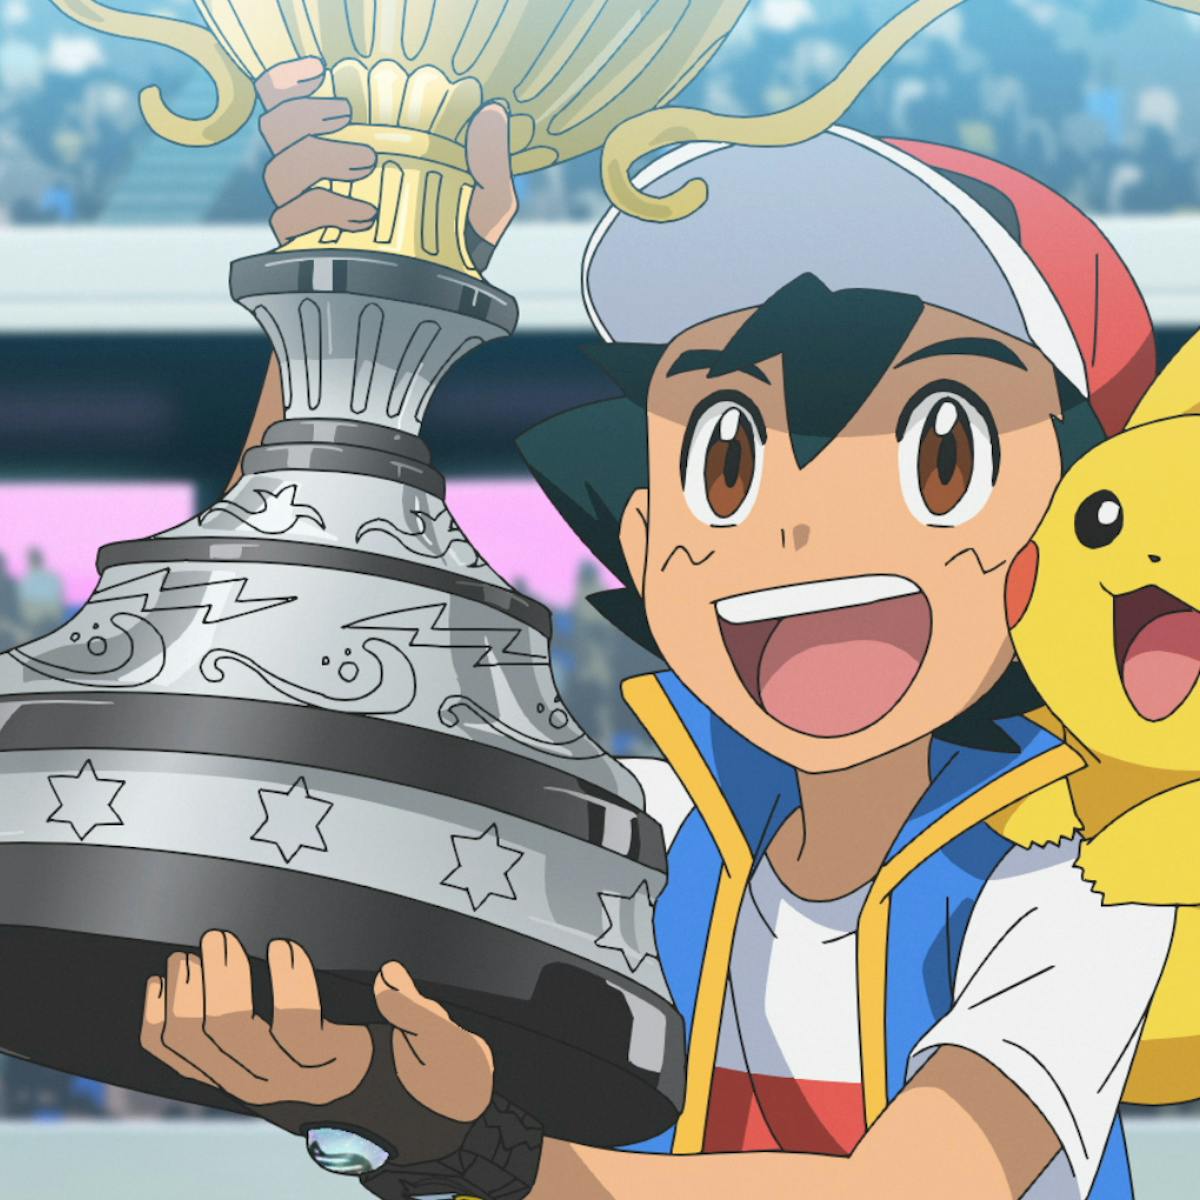 Pokémon's Ash wins World Championship after 25 years – here's why the  franchise is still capturing fans